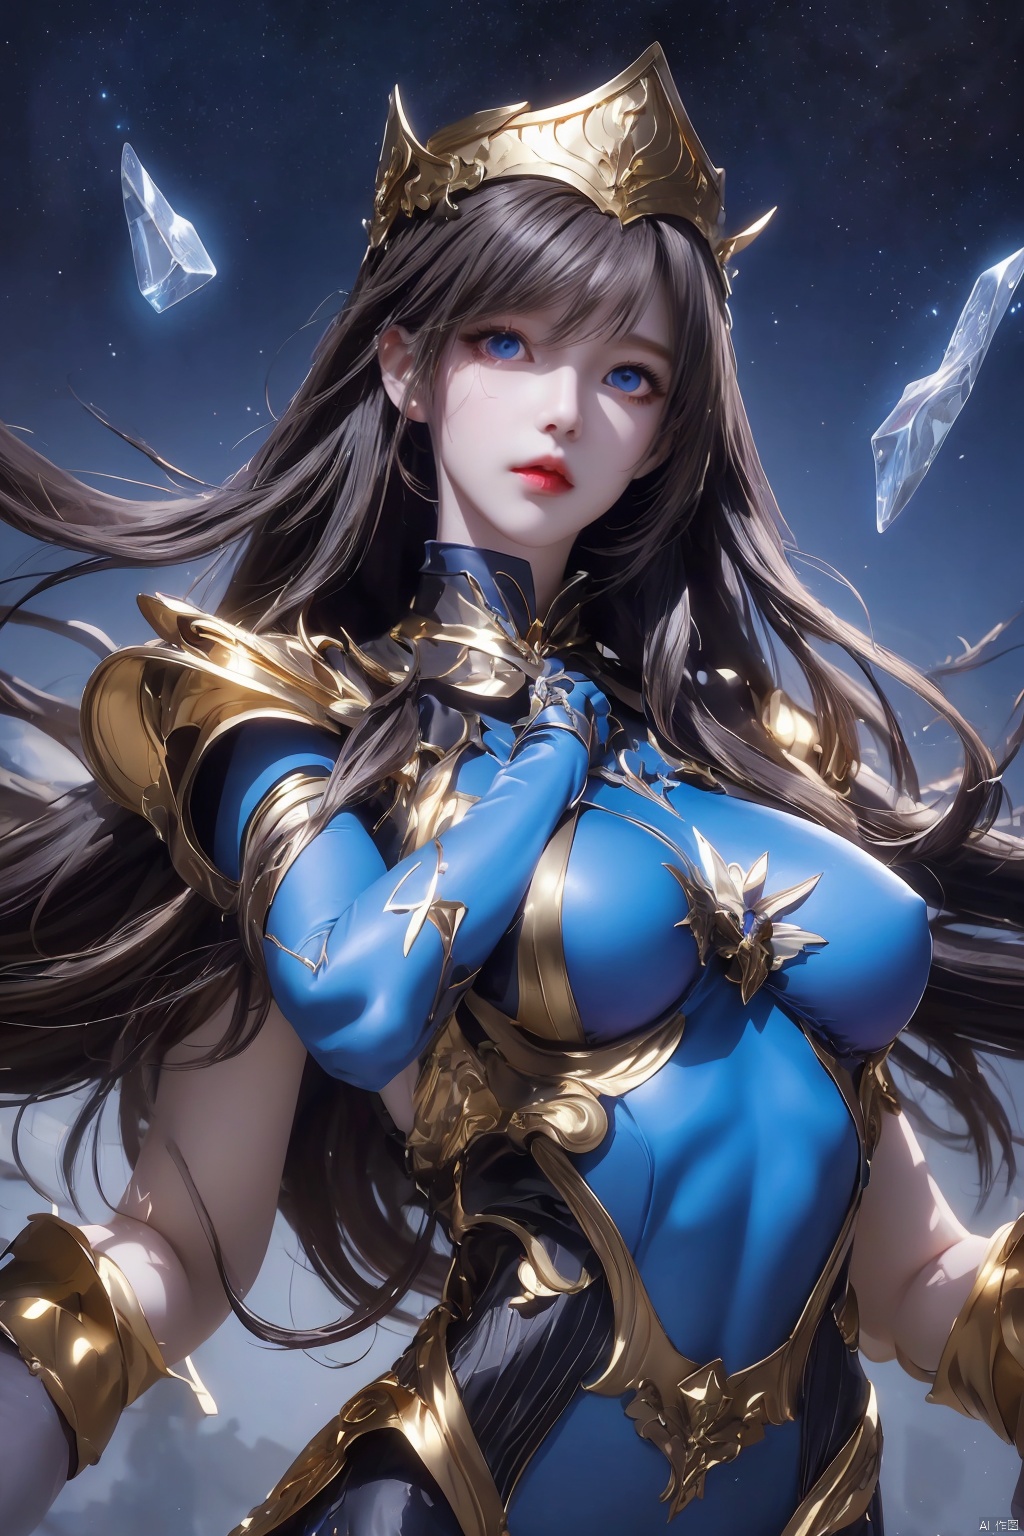  The image showcases female,blue eyes,fantasy outfit,magician,long dark hair,action pose,gold trim,oversized hat,dynamic composition,gemstones,bodysuit,epaulets,high-quality illustration,portrait orientation,mysterious,youthful appearance,star patterns,rich colors,detailed costume design,magic-themed accessories,celestial motifs.,